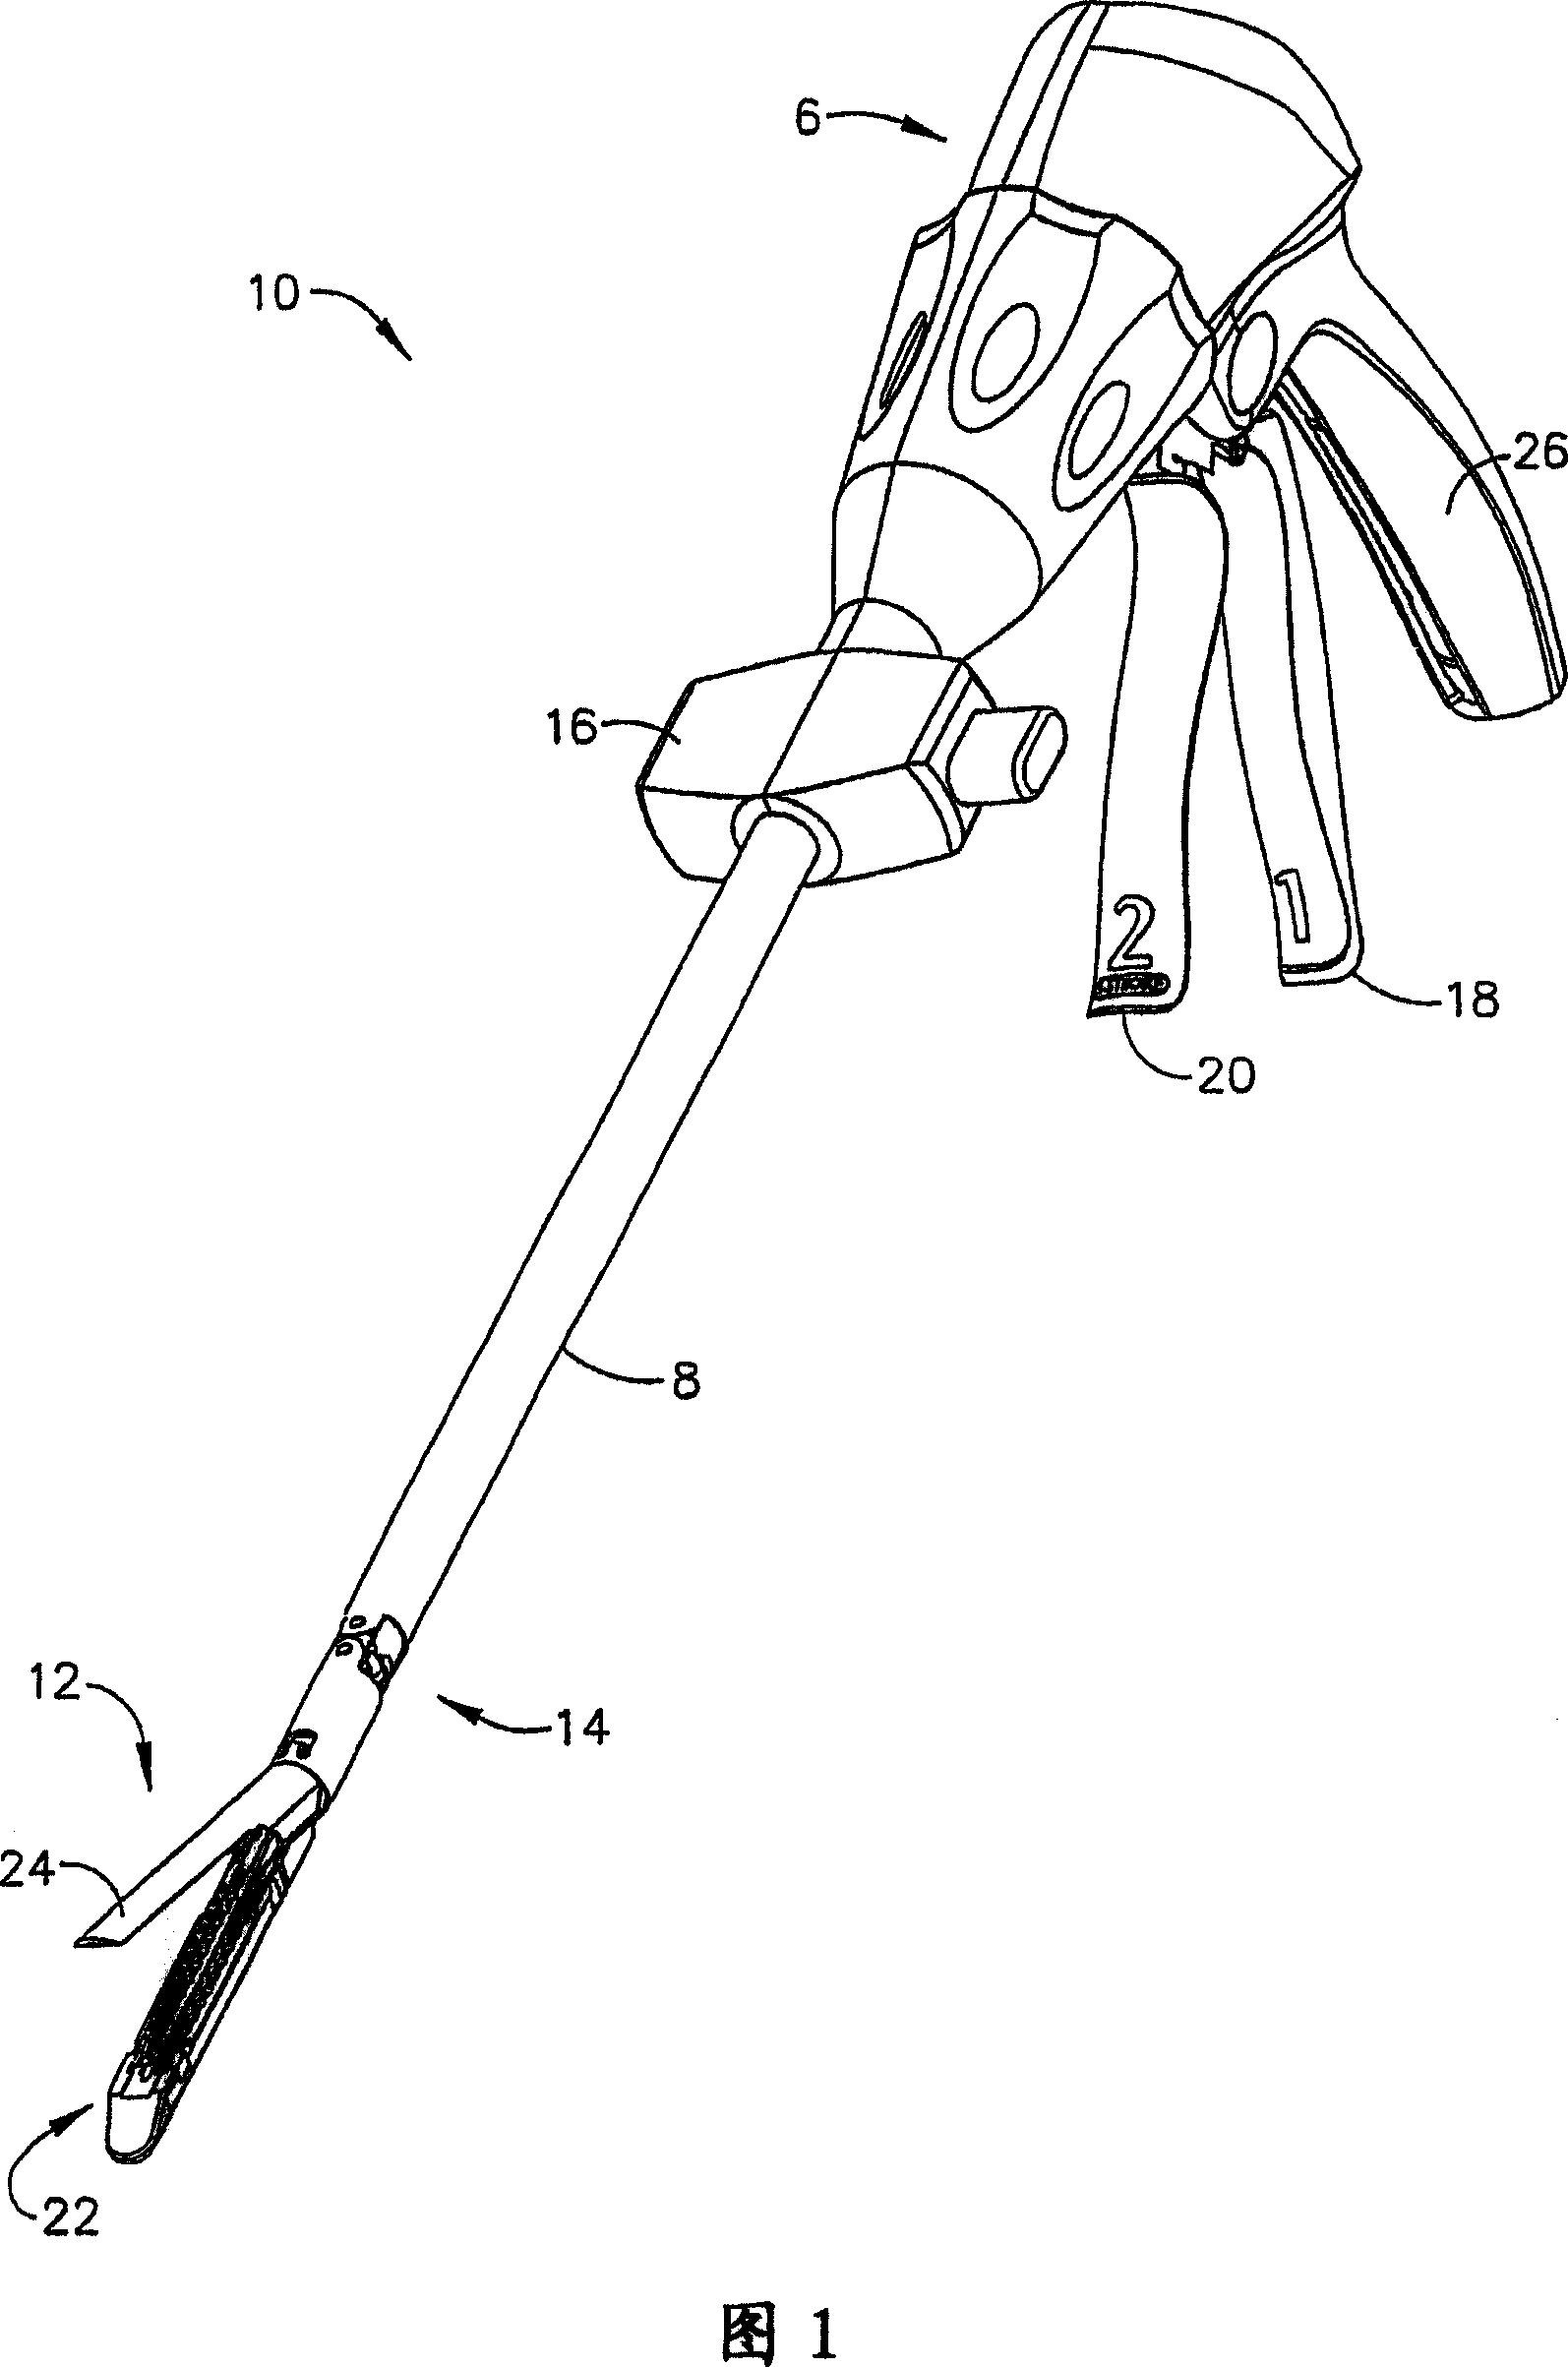 Motor-driven surgical cutting and fastening instrument with tactile position feedback